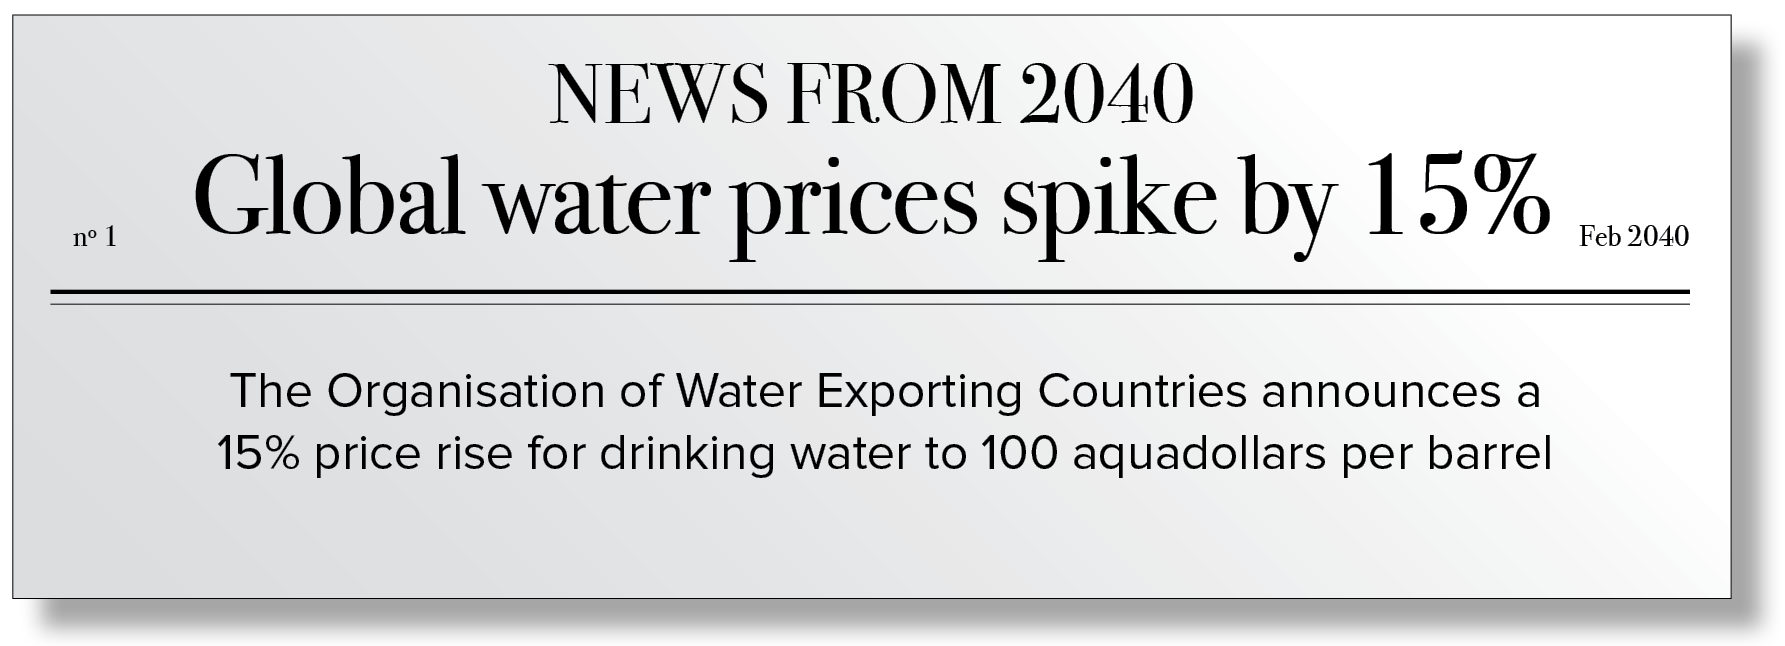 Fictional press release from 2040 with the following text: The Organisation of Water Exporting Countries announces a 15% price rise for drinking water to 100 aquadollars per barrel.